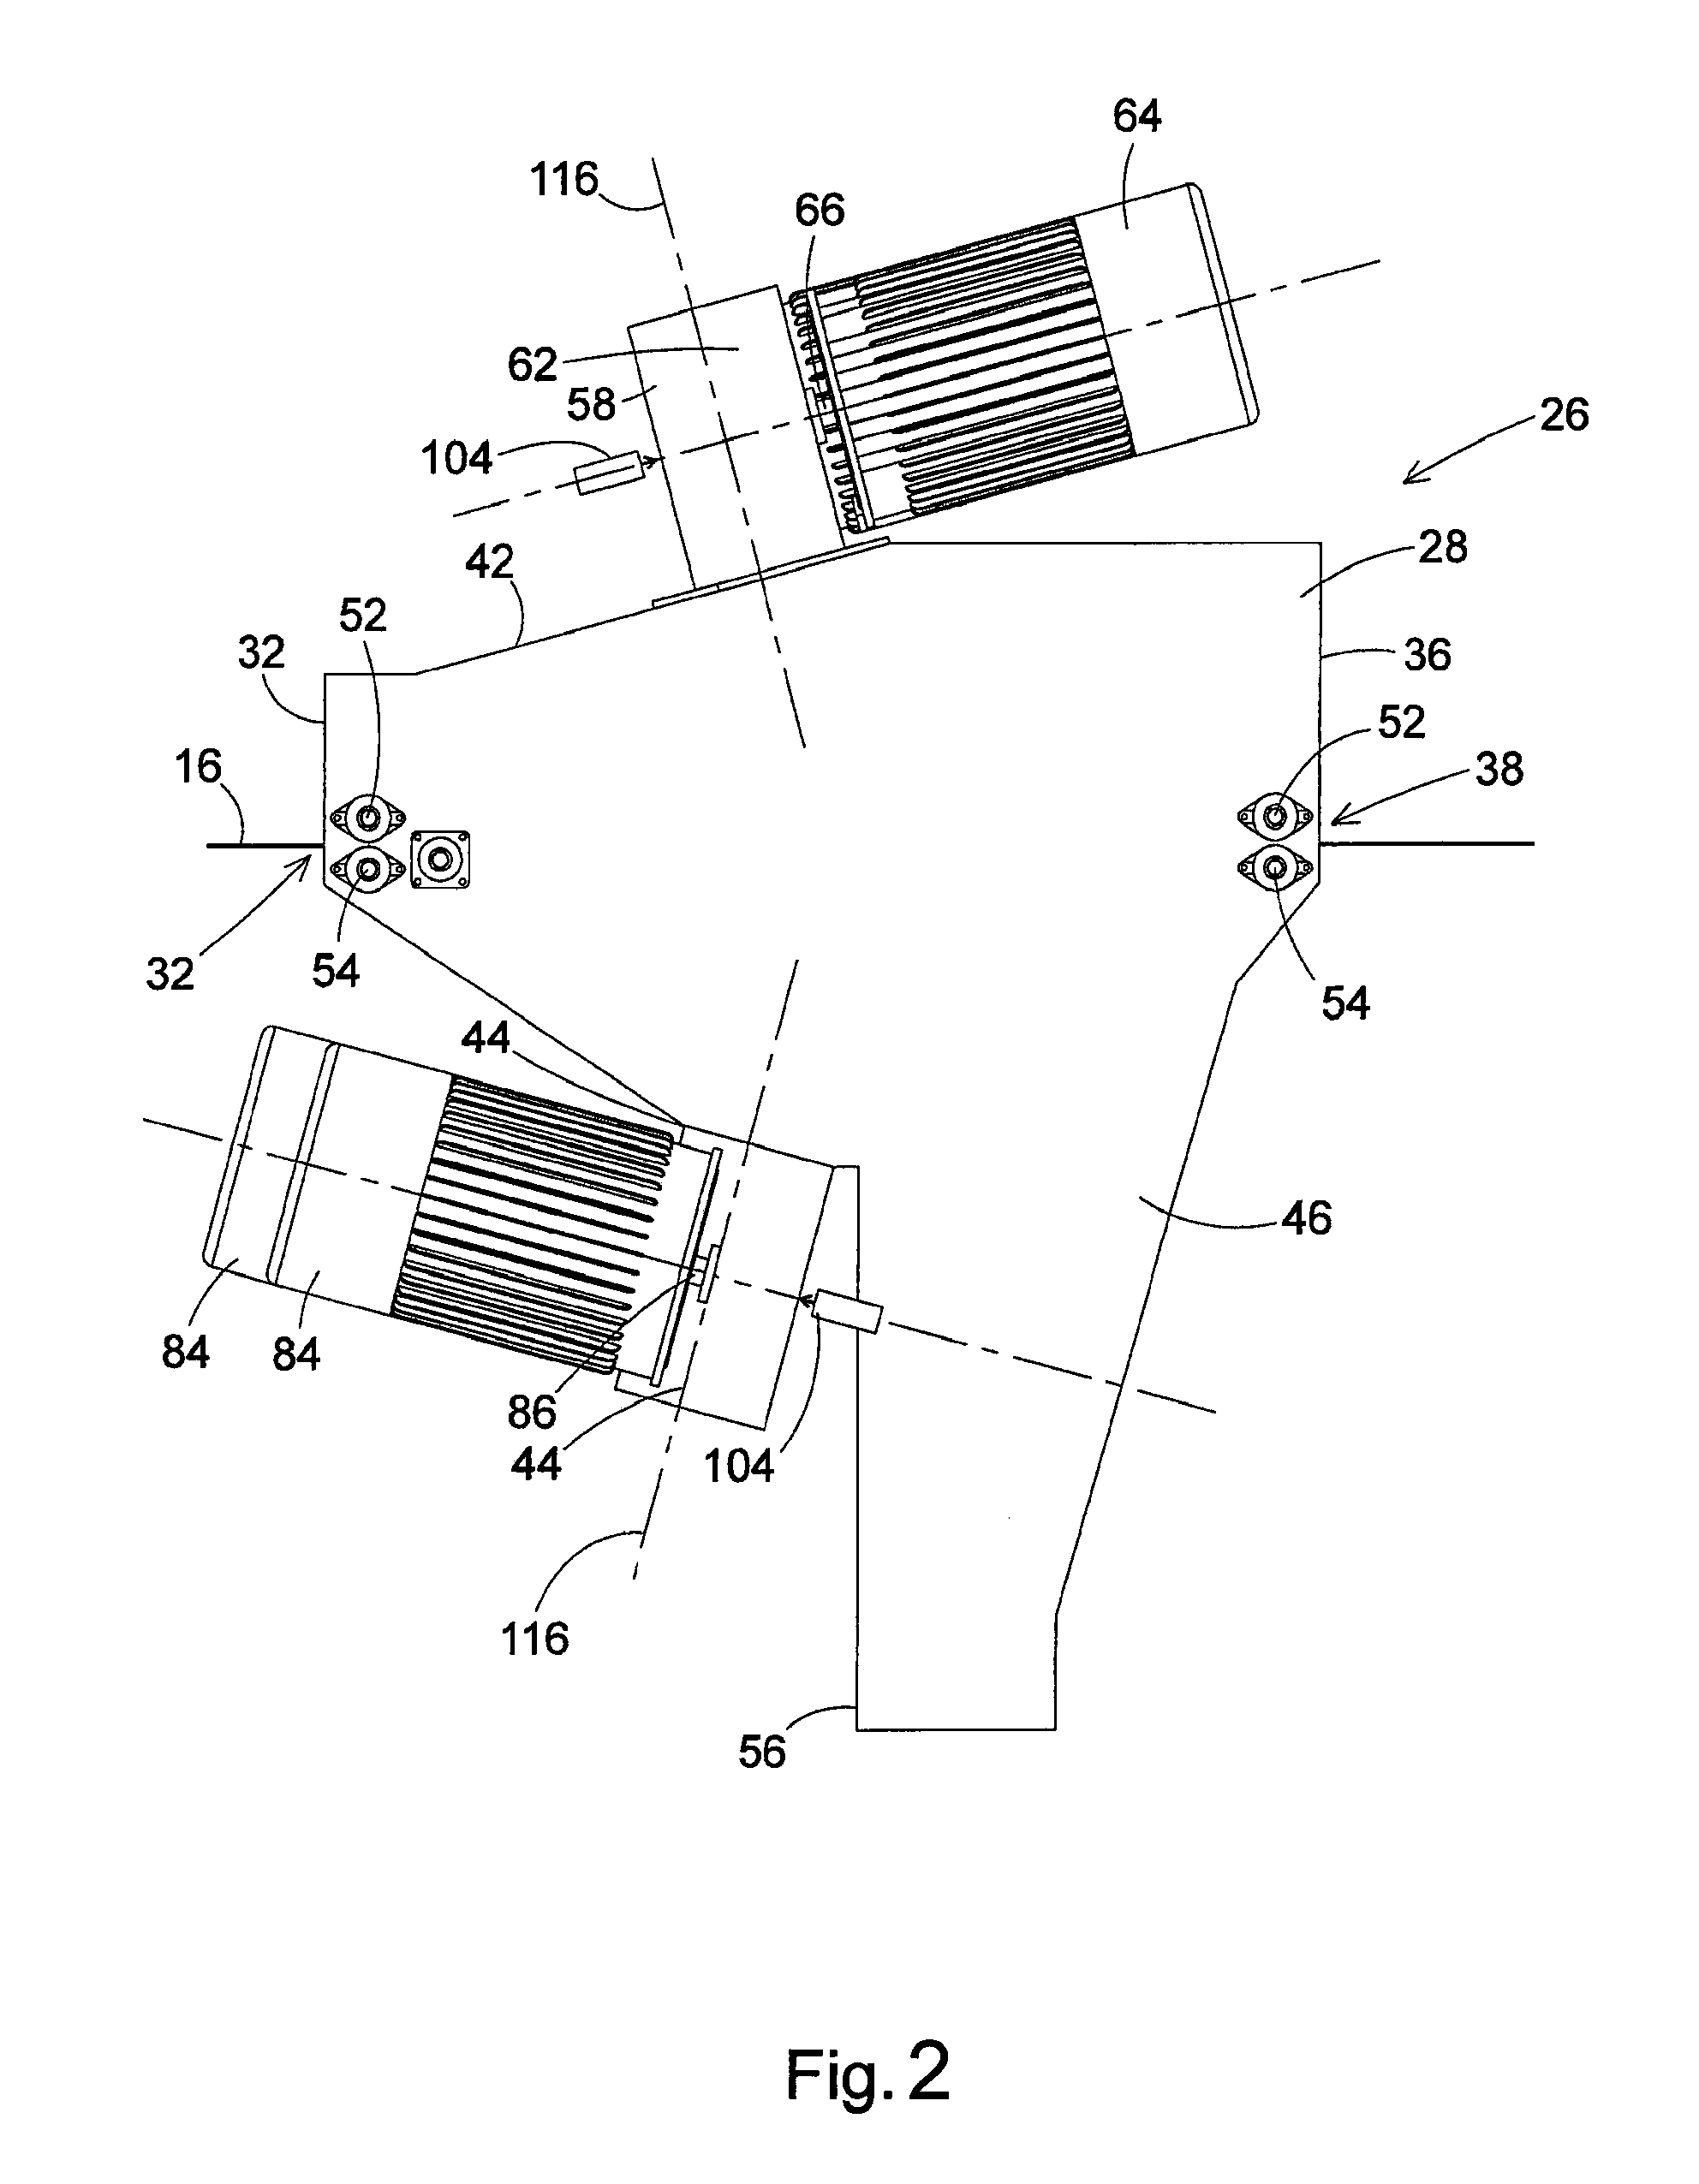 Method of Producing Rust Inhibitive Sheet Metal Through Scale Removal with a Slurry Blasting Descaling Cell